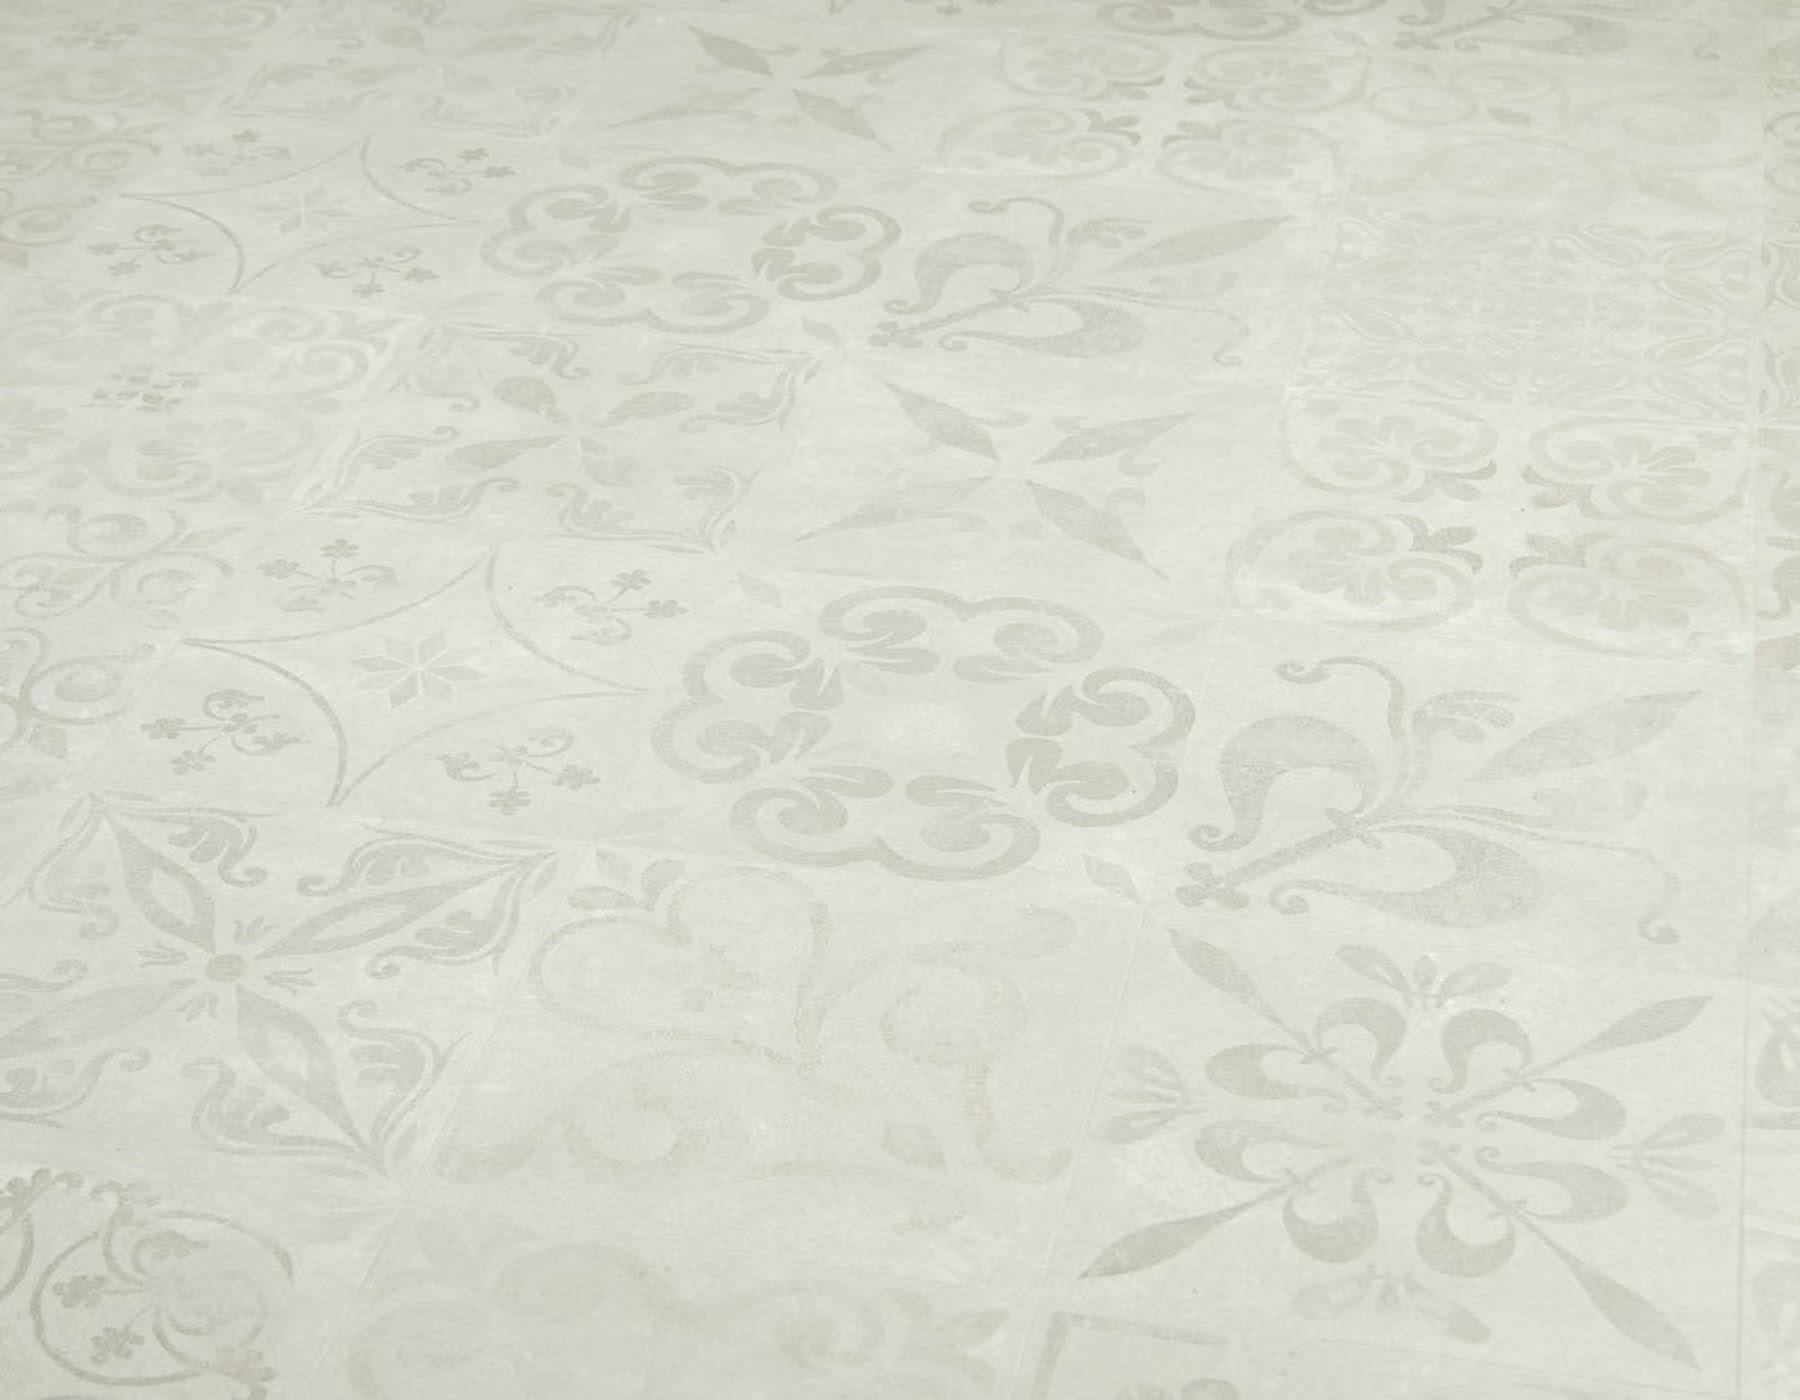 Faus traditional tile patterned laminate flooring